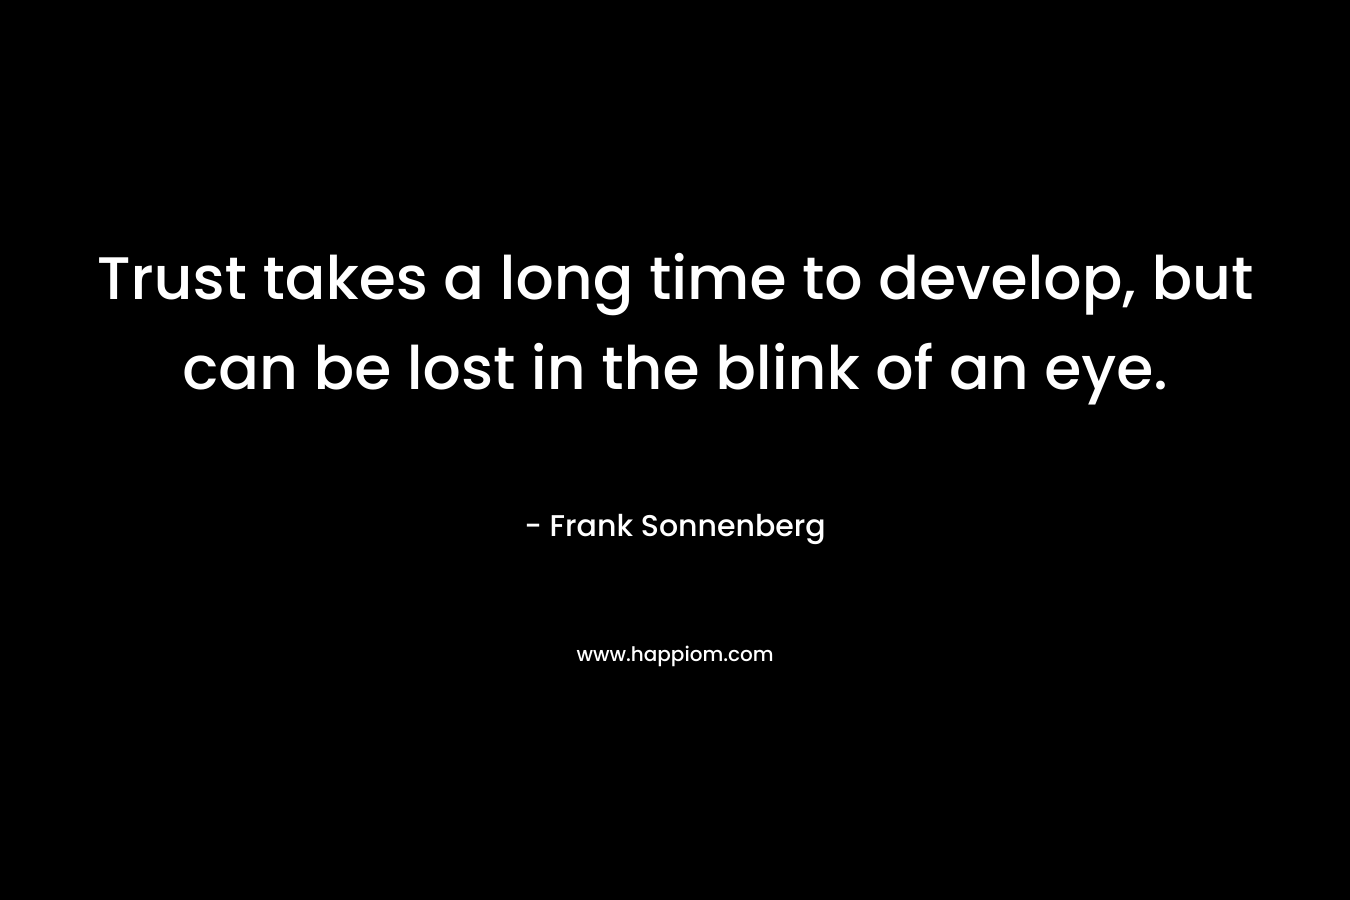 Trust takes a long time to develop, but can be lost in the blink of an eye. – Frank Sonnenberg